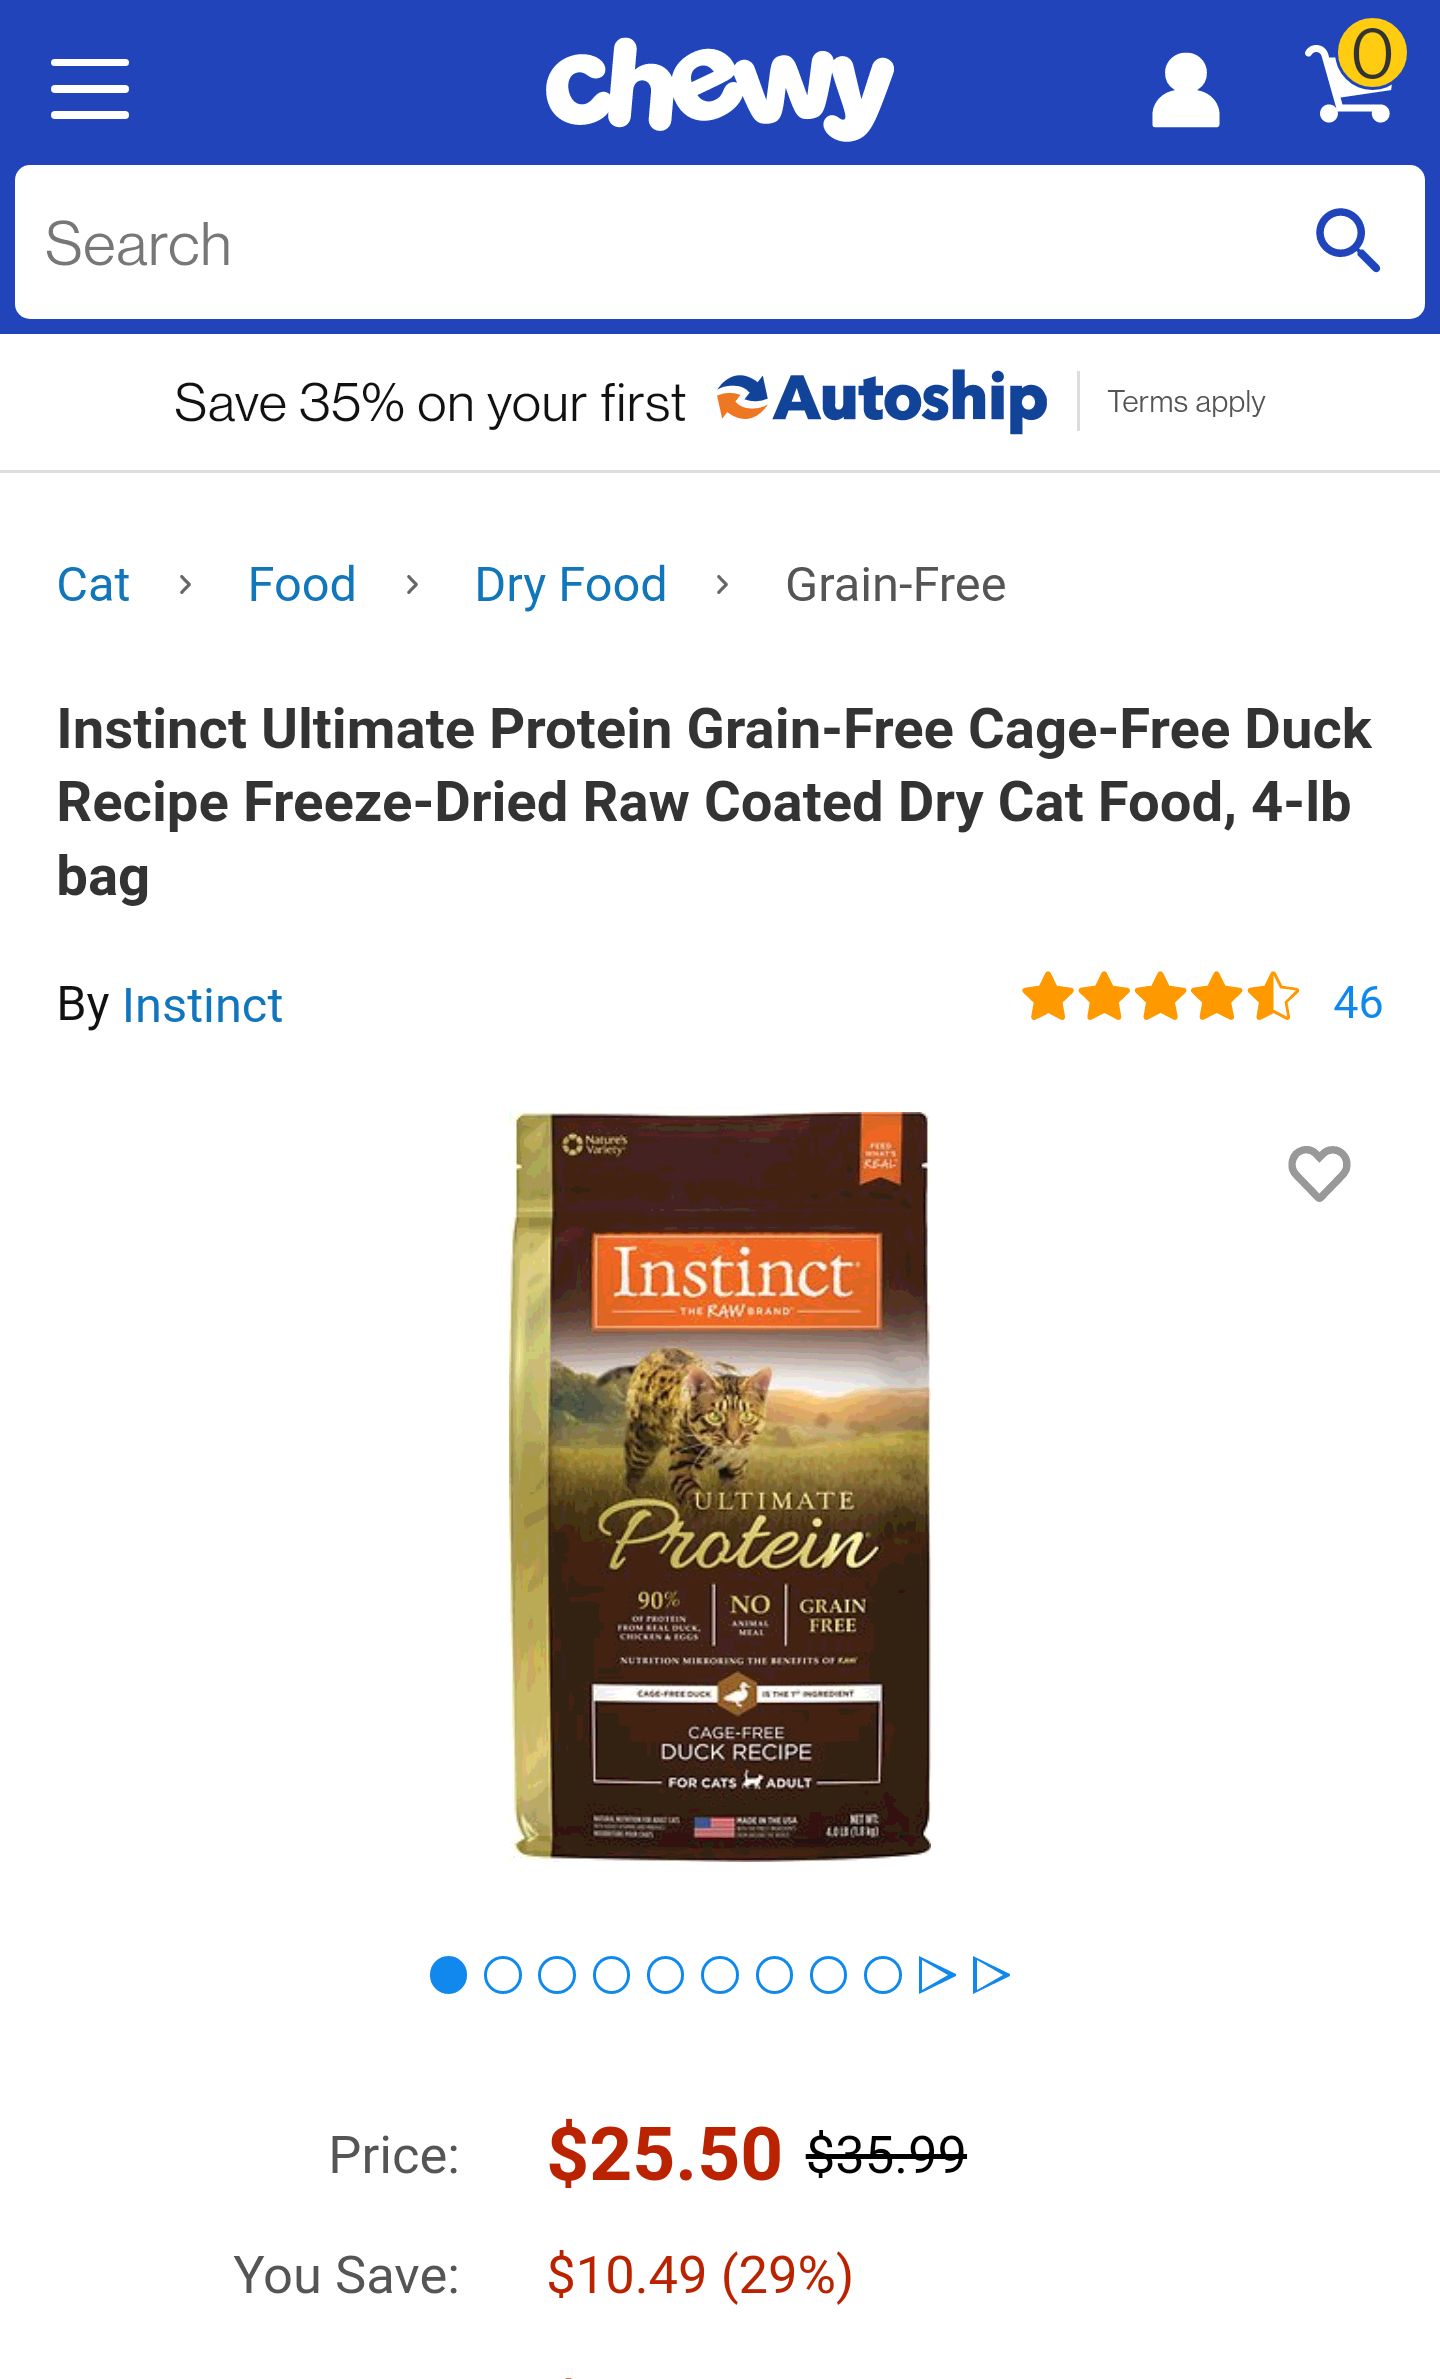 INSTINCT Ultimate Protein Grain-Free Cage-Free Duck Recipe Freeze-Dried Raw Coated Dry Cat Food, 4-lb bag - Chewy.com 猫粮